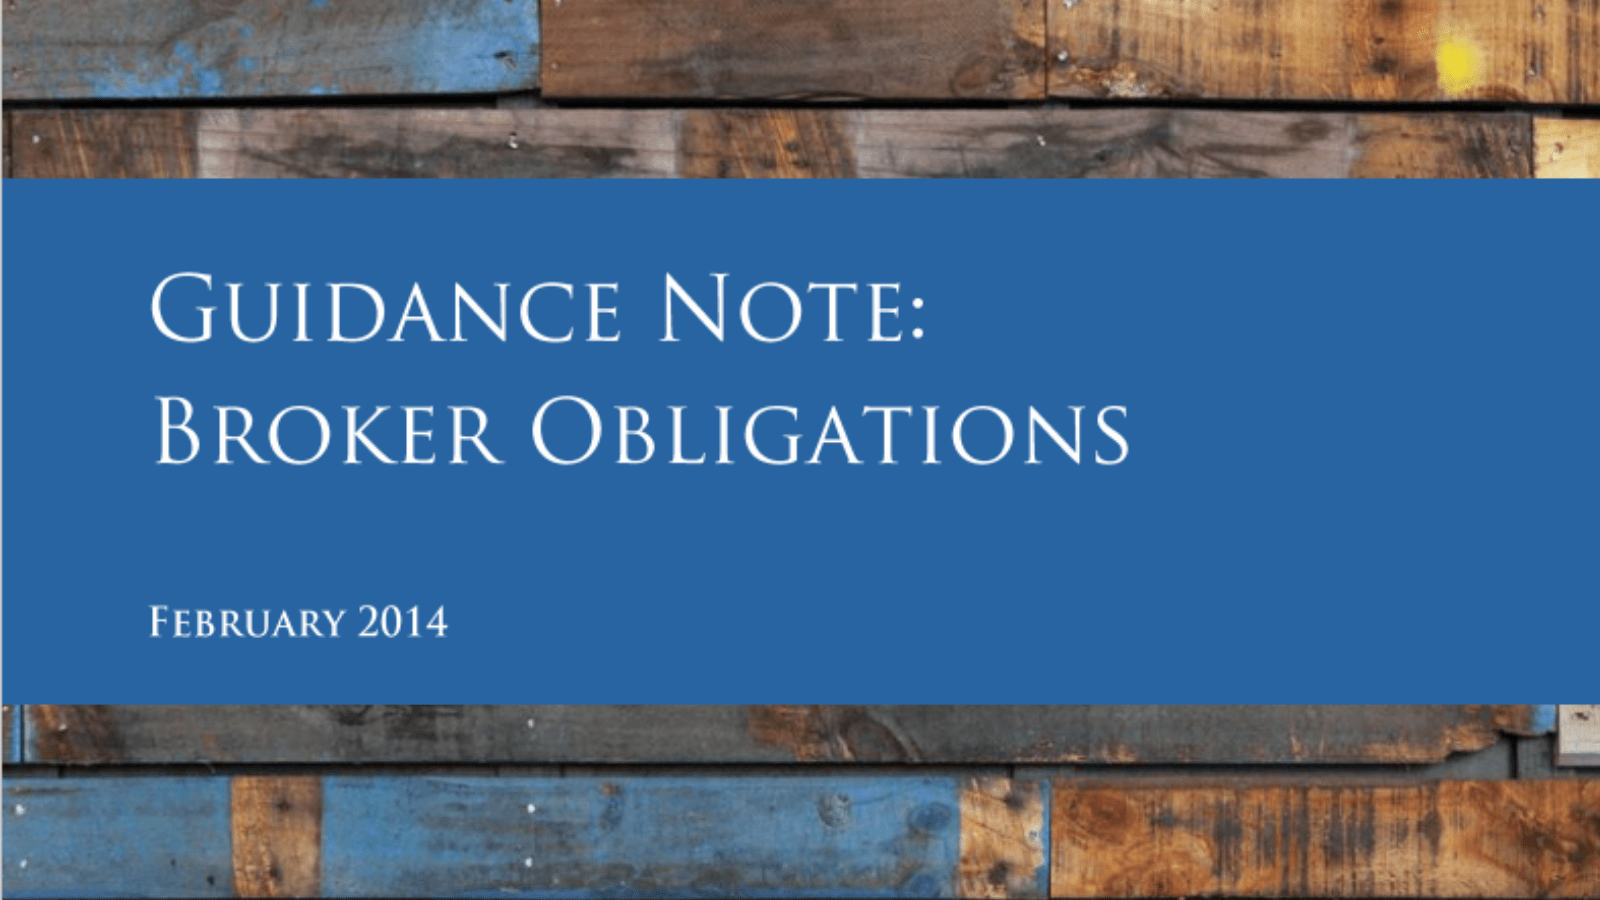 This cover image describes the guidance note: Broker obligations.